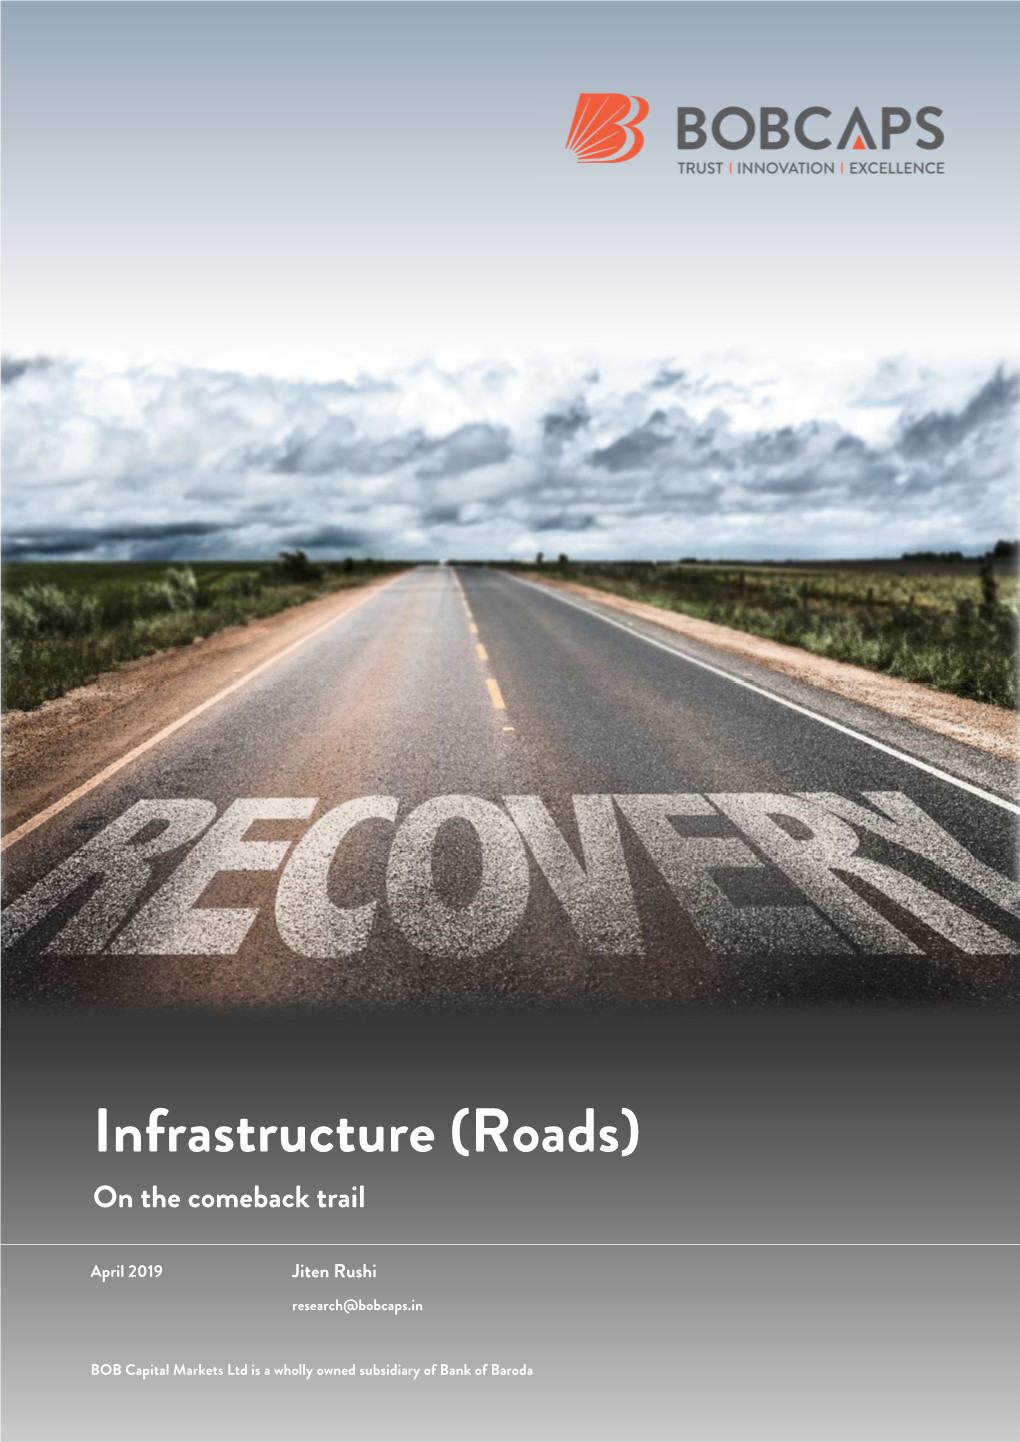 Infrastructure (Roads) on the Comeback Trail